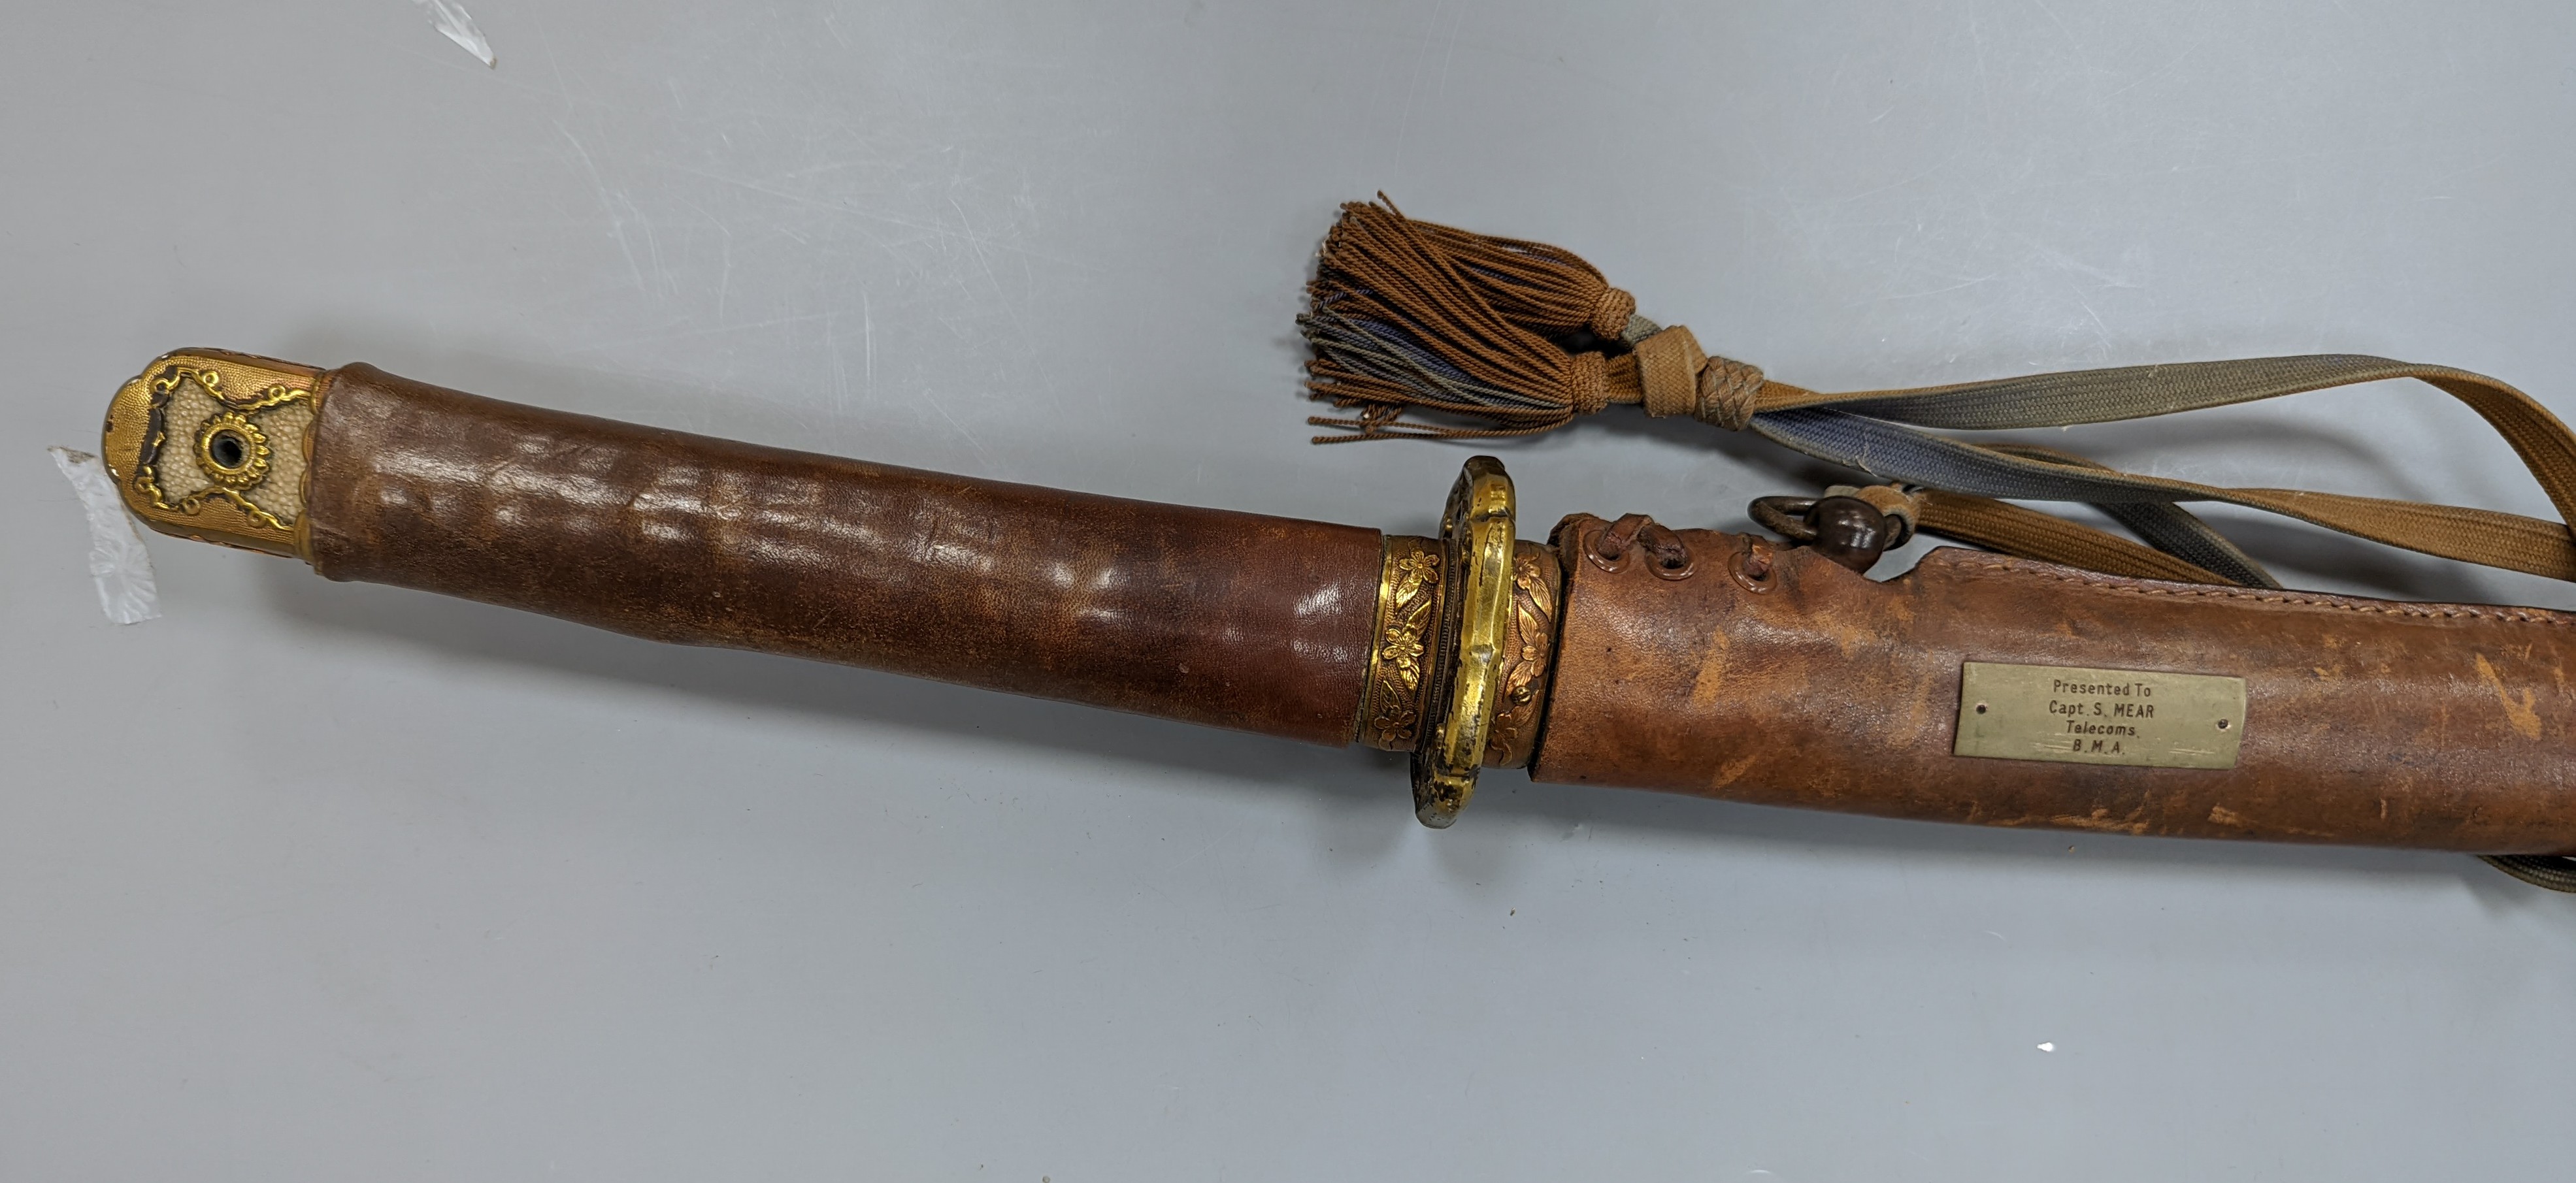 A Japanese Katana with leather covered sheath, plaque reading ‘Presented to Capt. S. Mear Telecoms B.M.A’ 93 cms long.